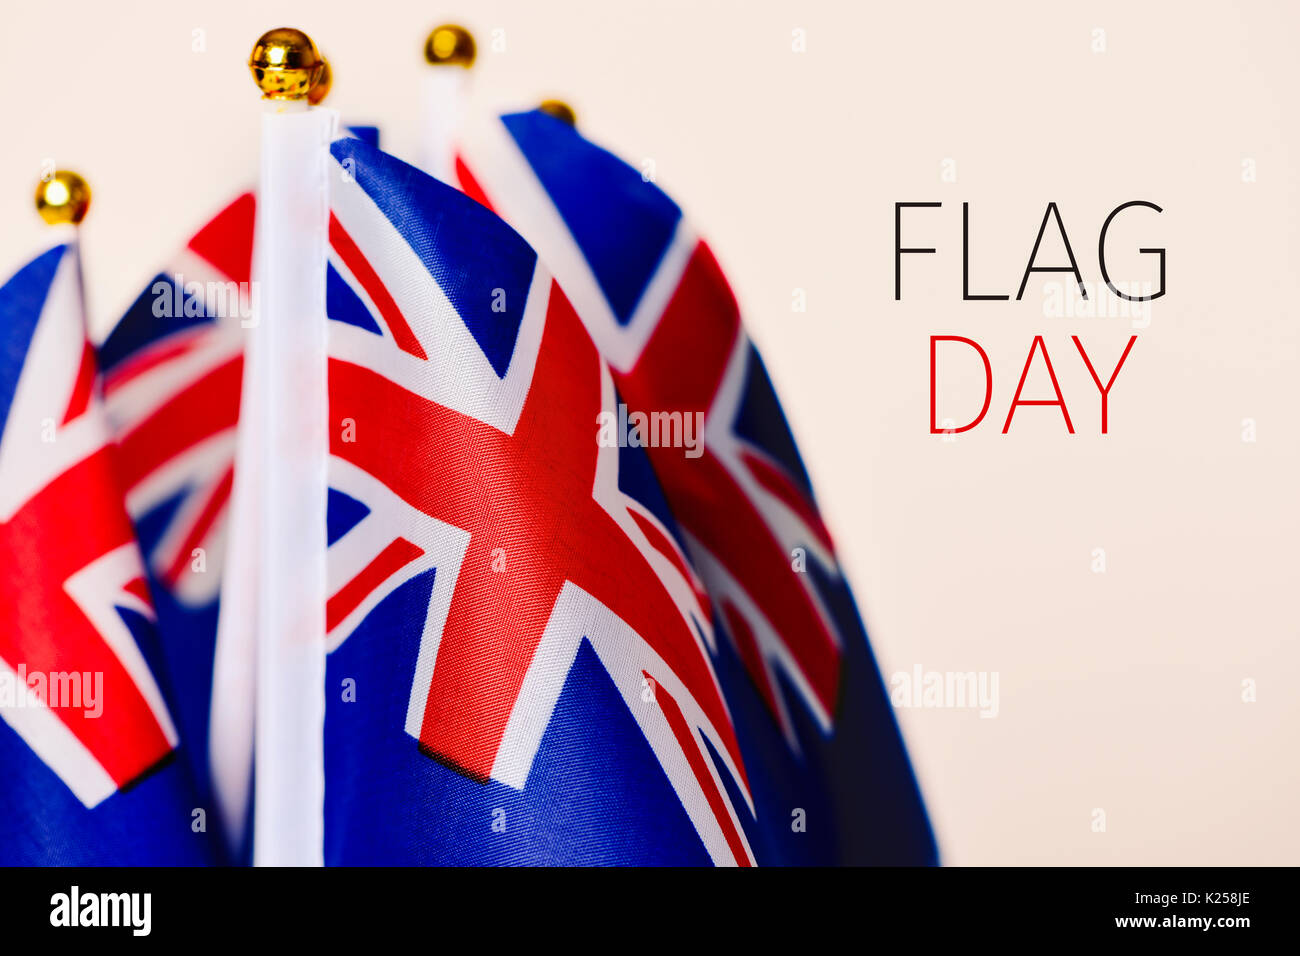 closeup of some australian flags and the text flag day against an off-white background Stock Photo